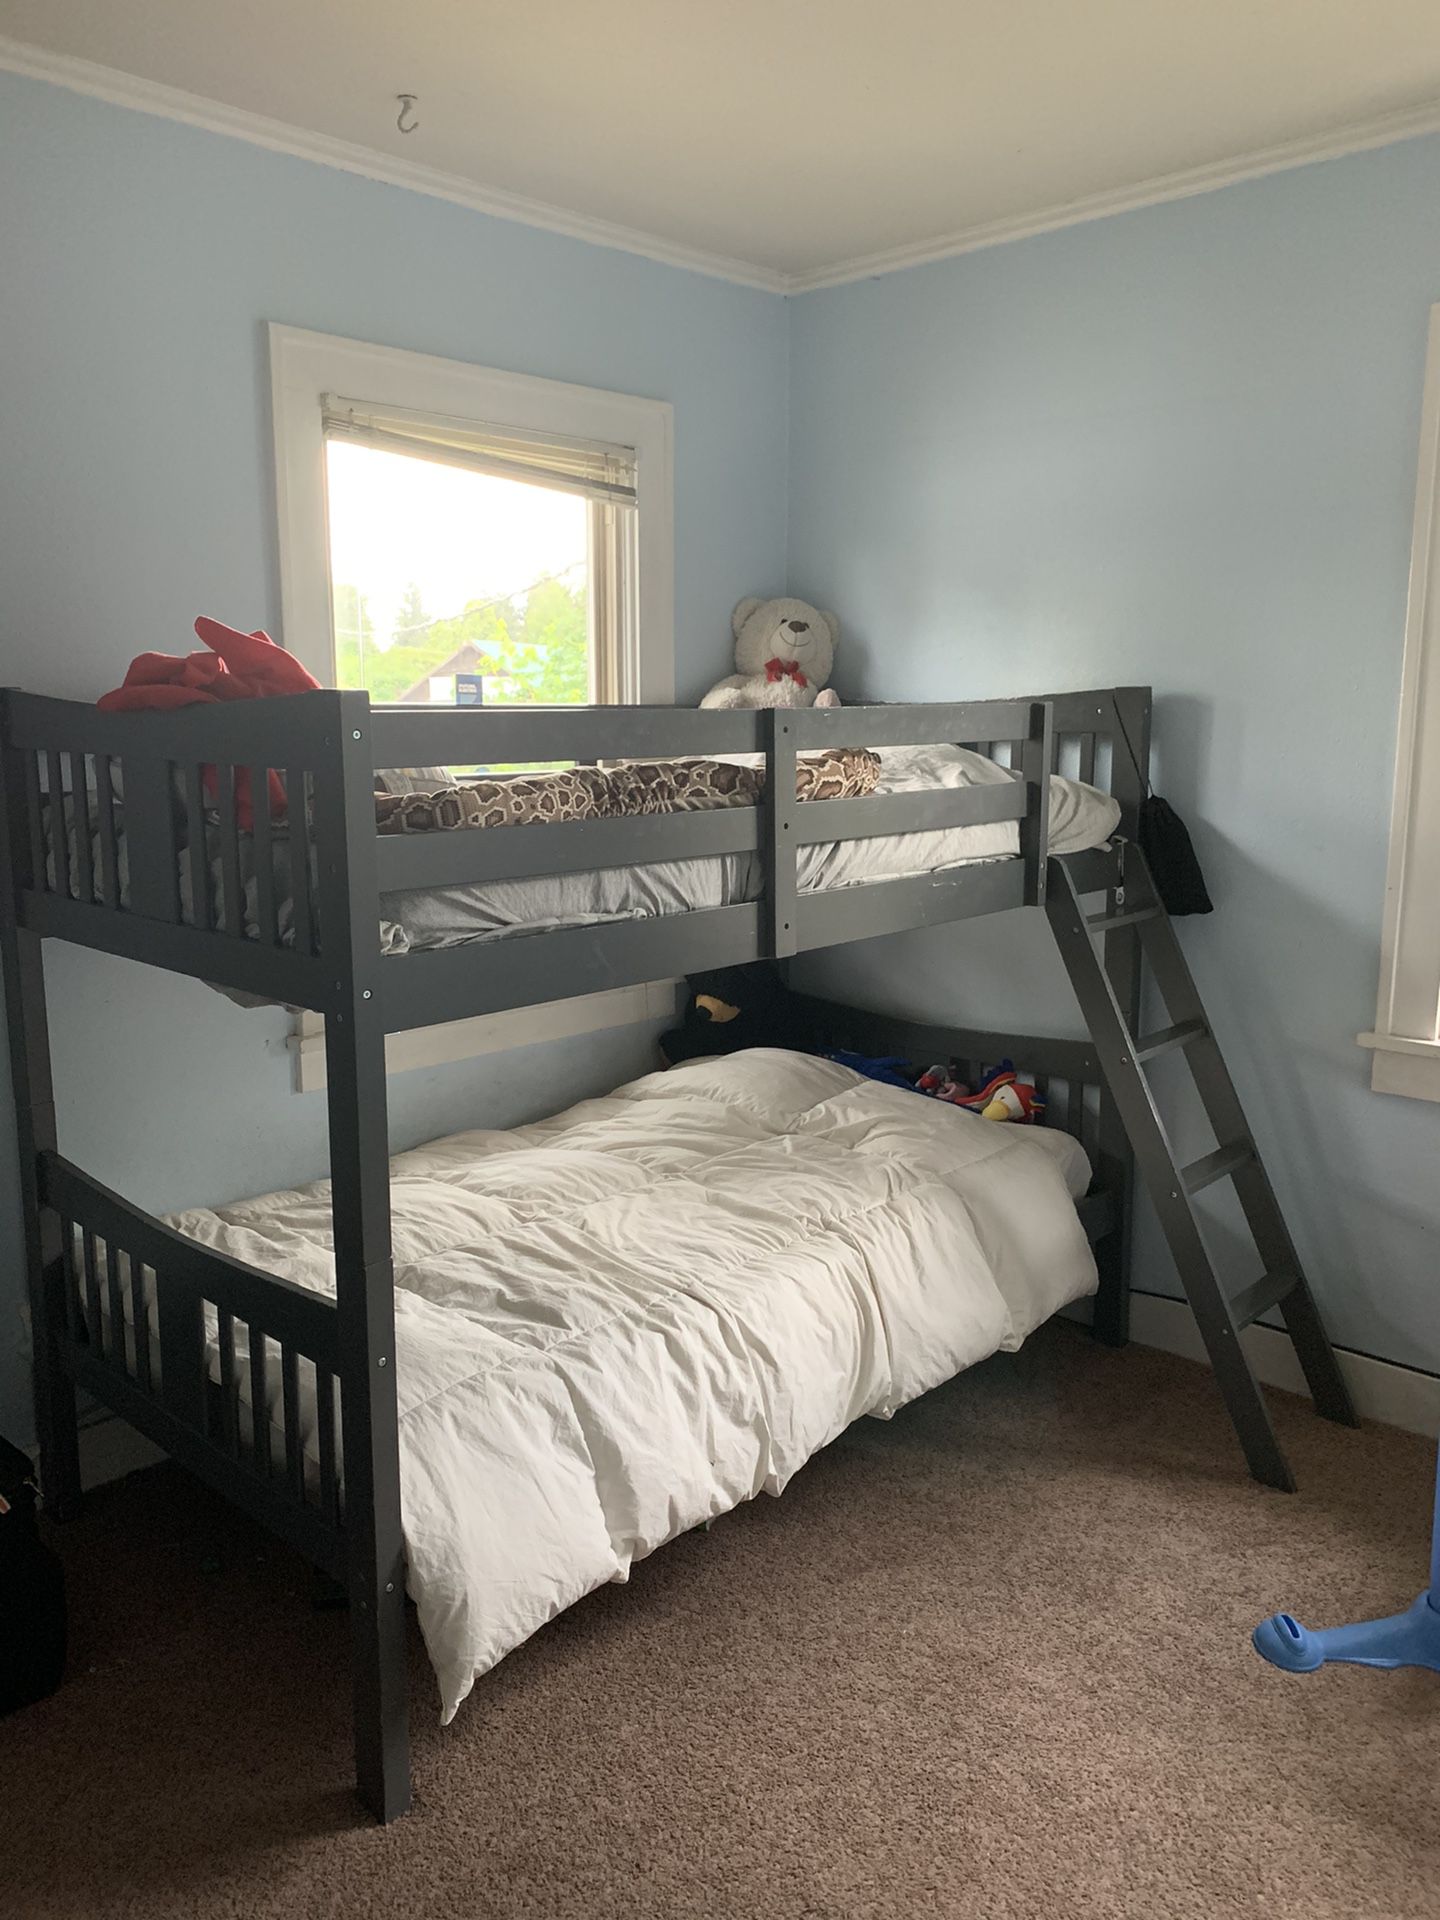 Bunk Bed for $50